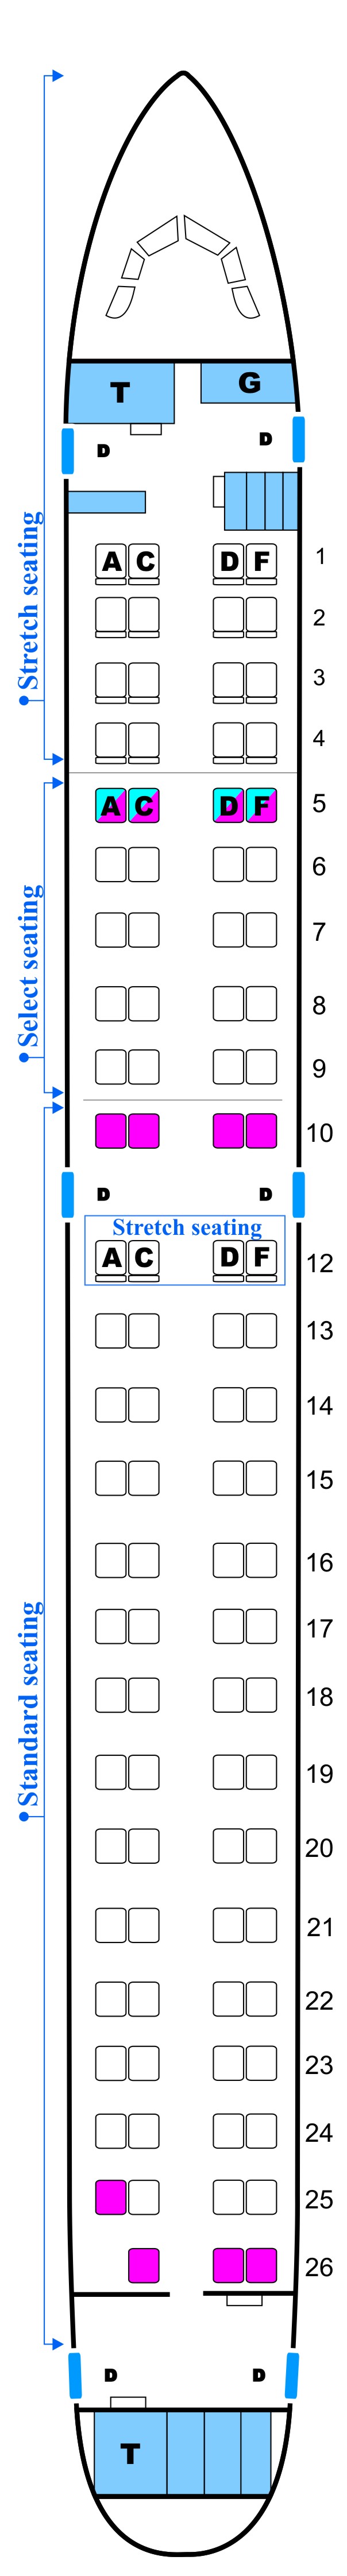 Seat map for Midwest Airlines Embraer E190 Config. A